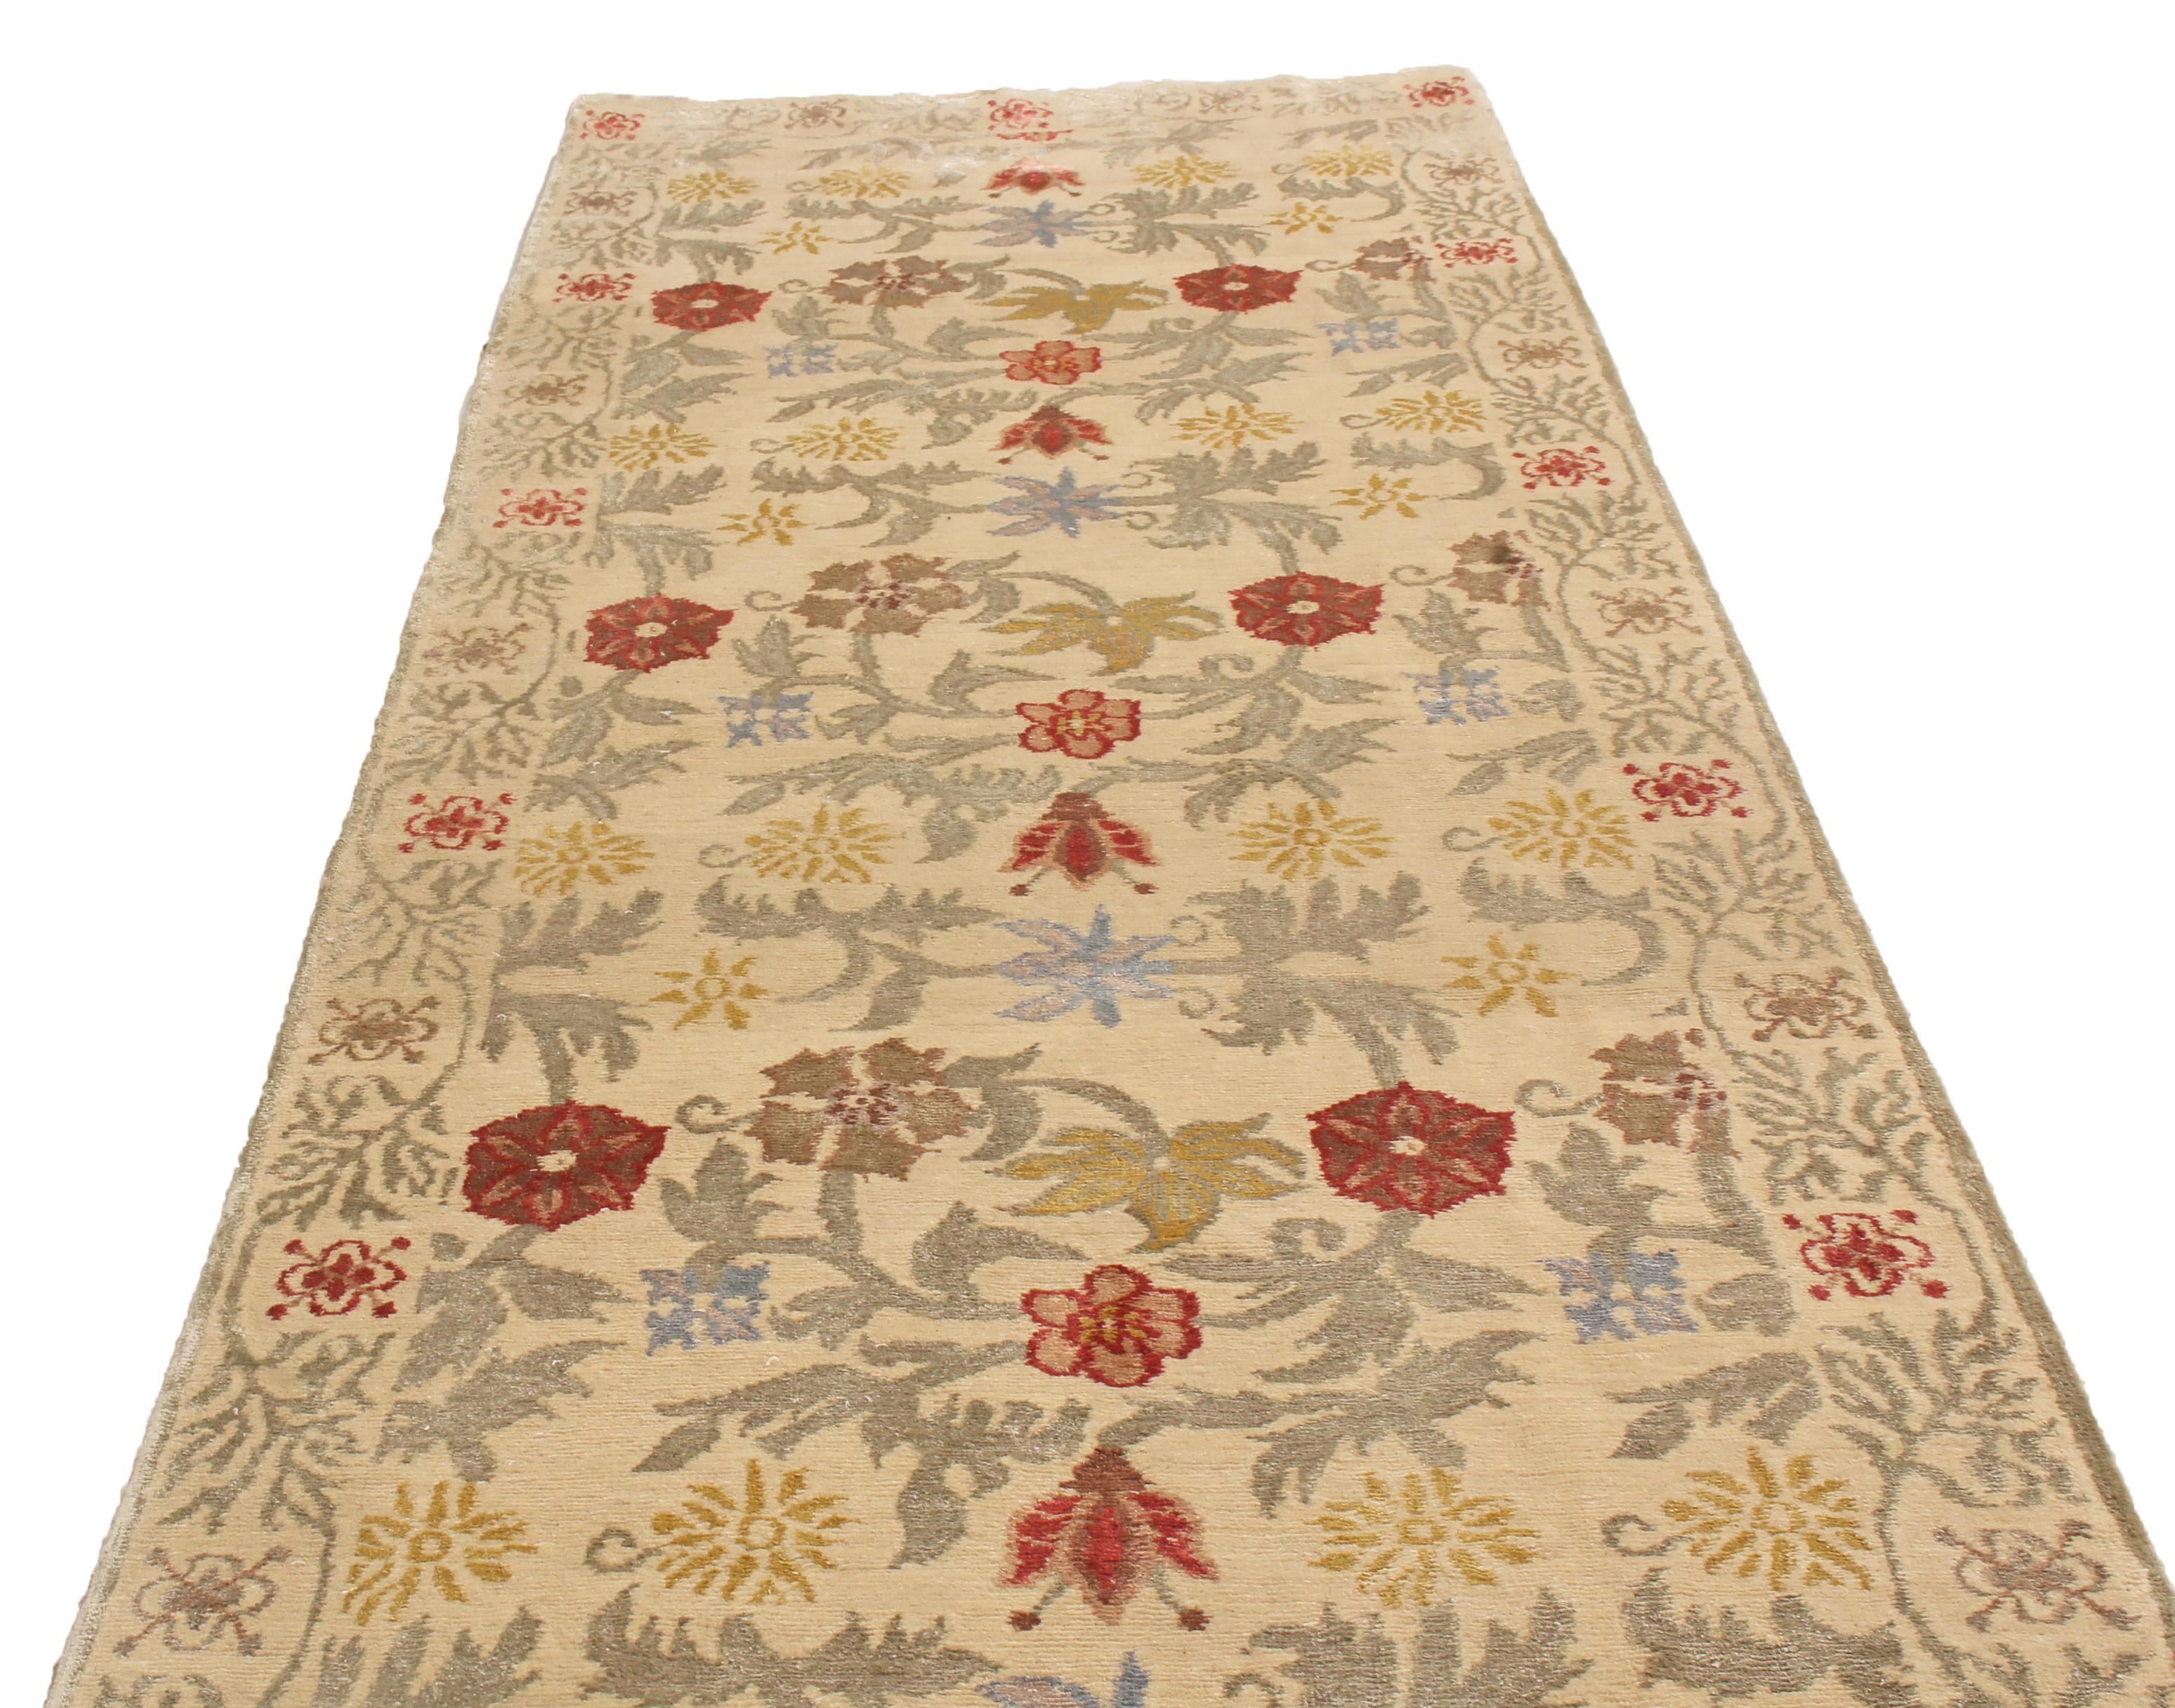 Hand knotted in Nepal, this floral runner features a Bilbao floral design, hand knotted in a lustrous combination of wool and silk. Named for the Spanish city fathering its ancestral patterns, the repetition of the all over tulip and palette floral